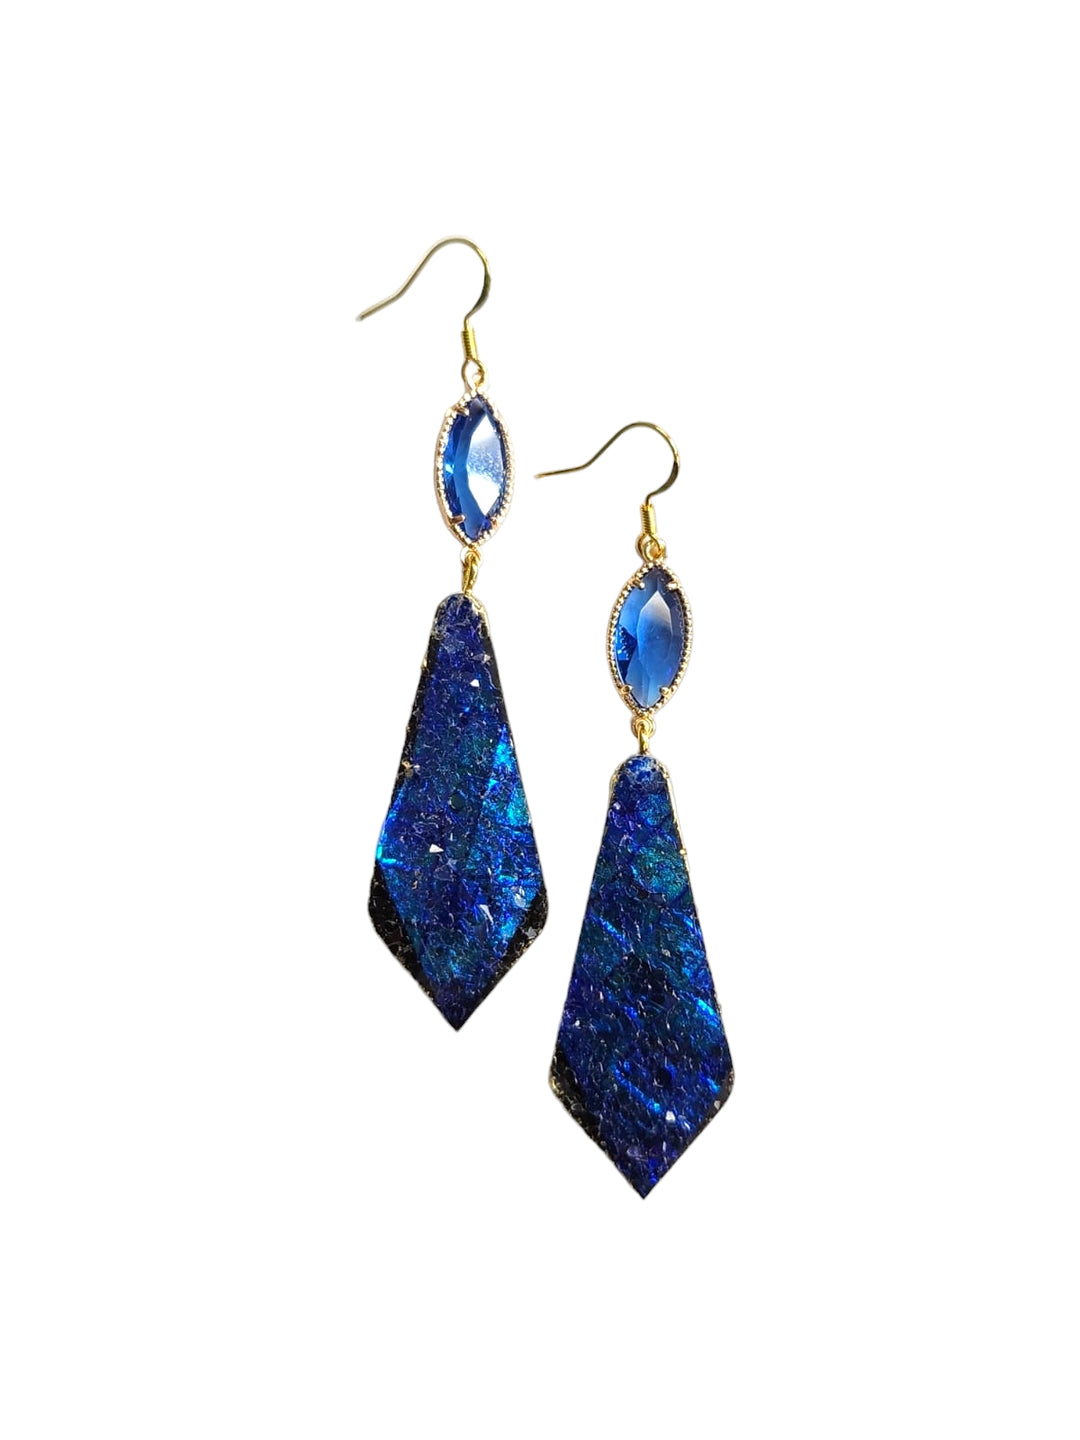 The Resin Gem Tie Earring Collection